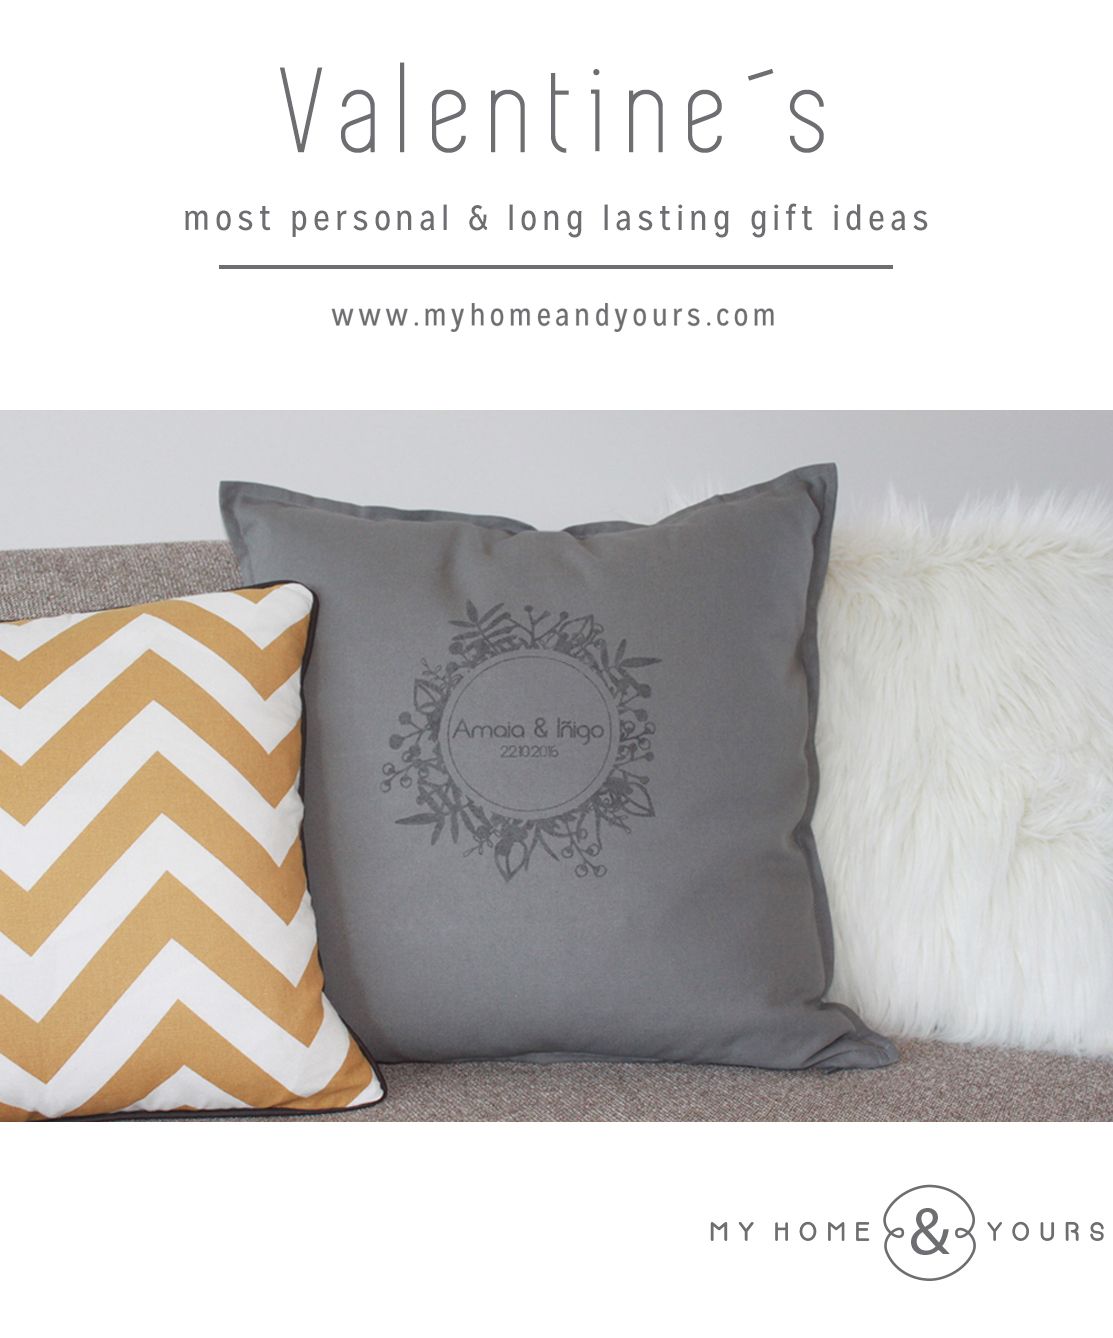 valentines-most-personal-and-long-lasting-gift-ideas